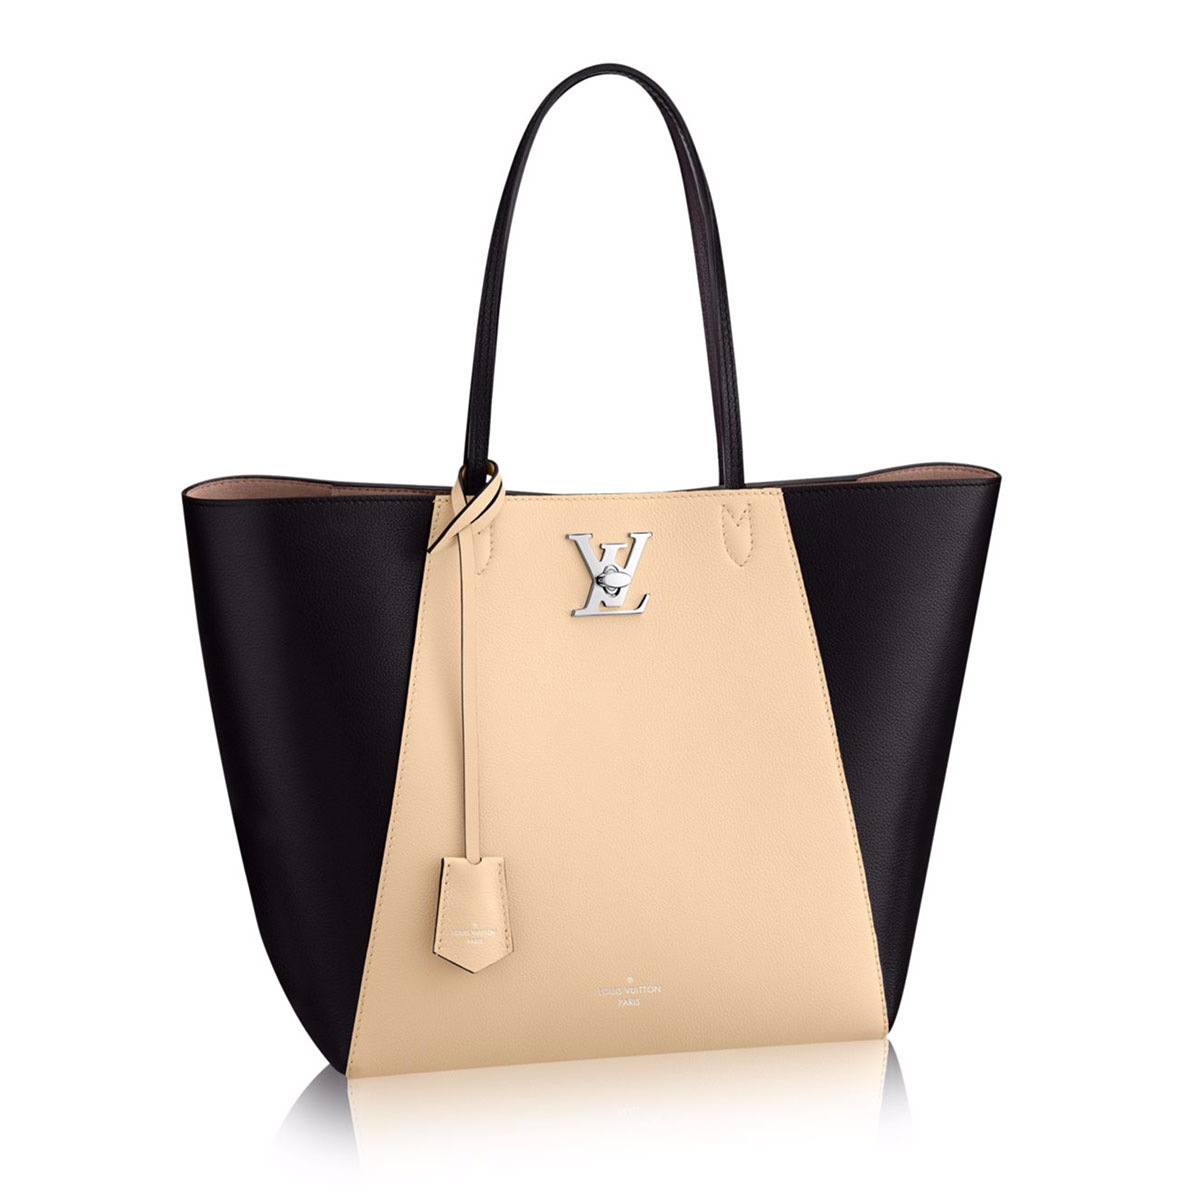 My first Louis Vuitton. Just got this LockMe Shopper and I'm